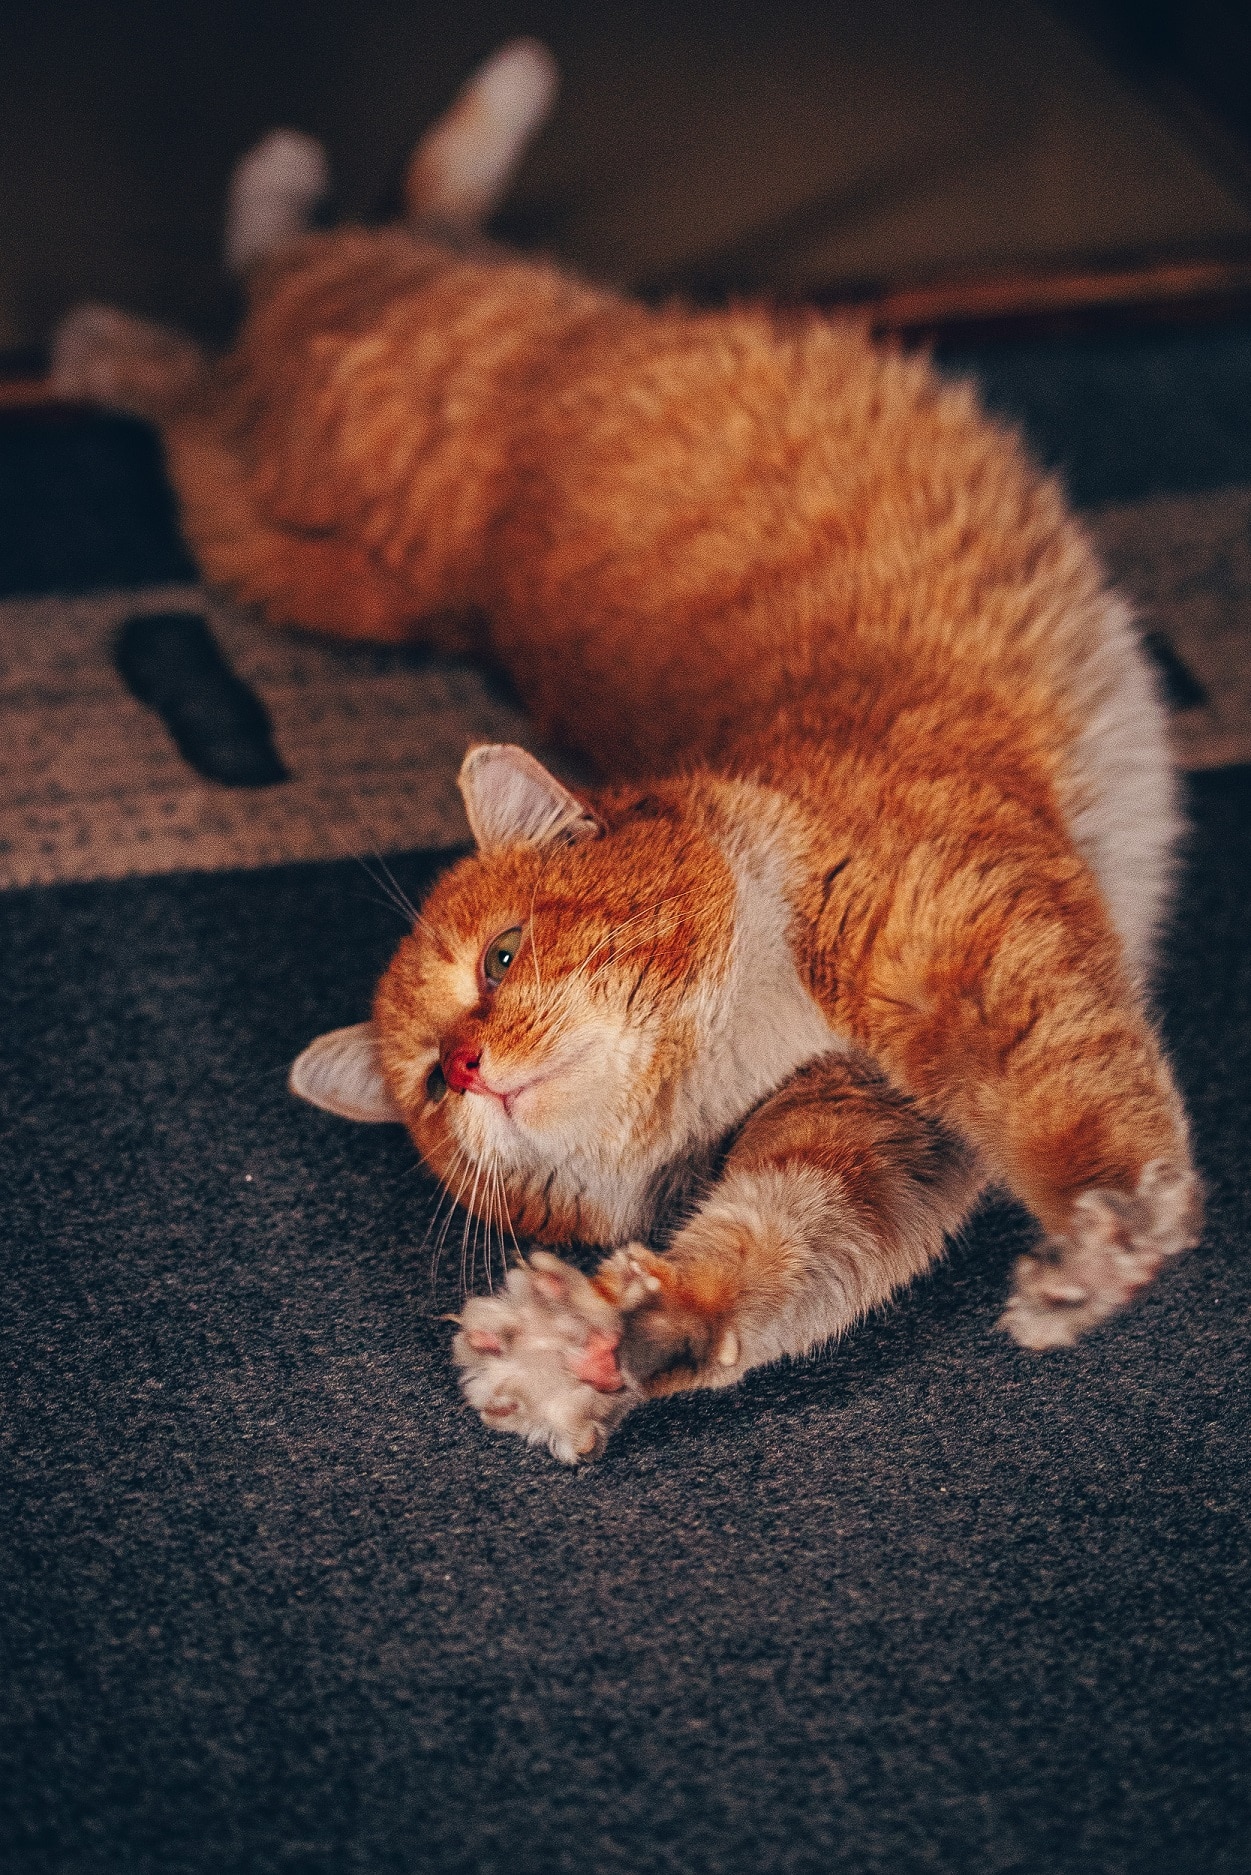 A ginger cat stretching.